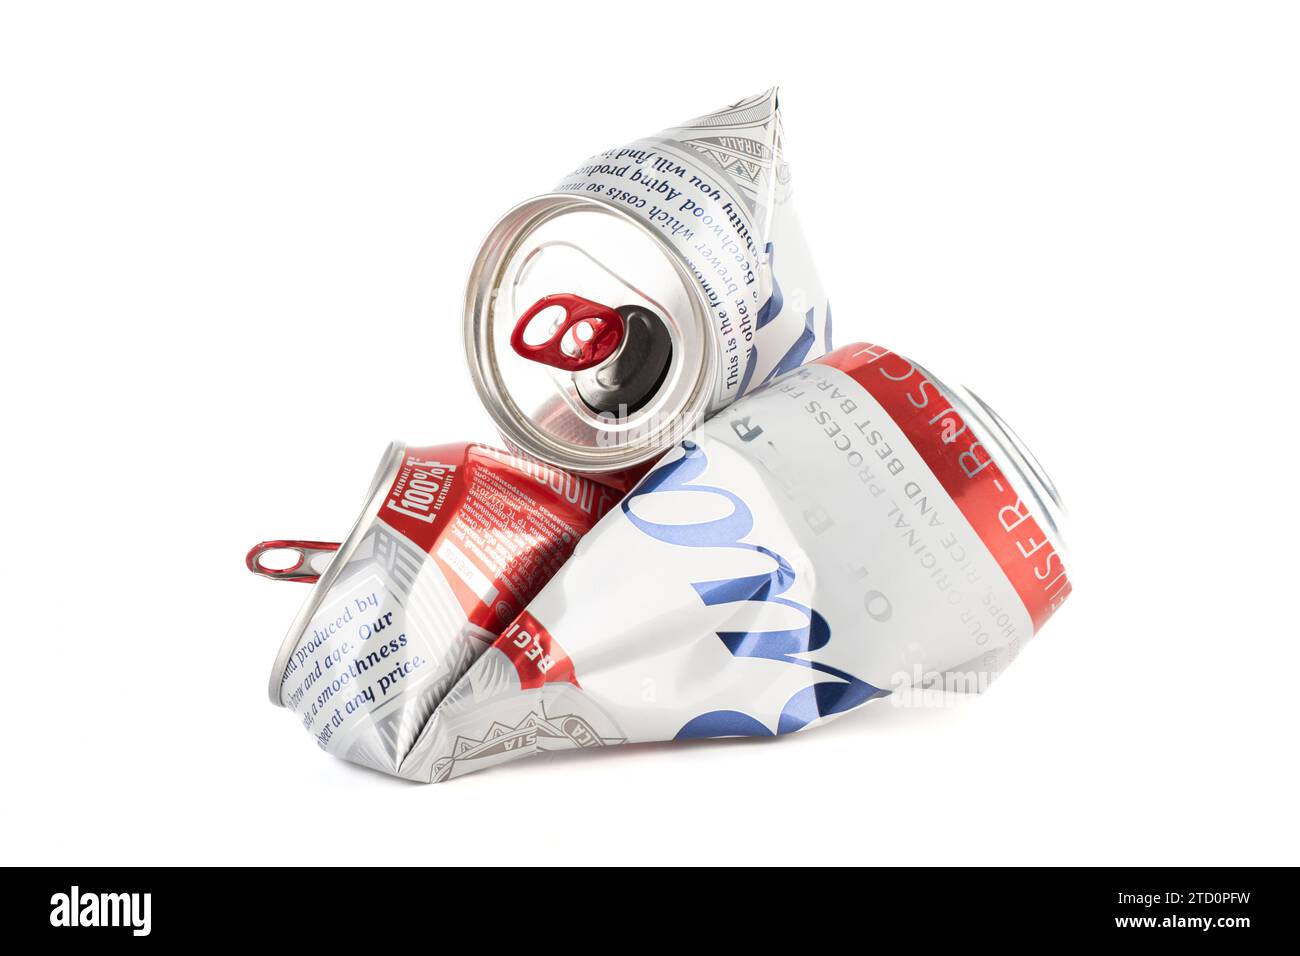 Moscow, Russia - December 13, 2023: Crumpled and empty cans of Bud beer on a white background. Copy space. Stock Photo